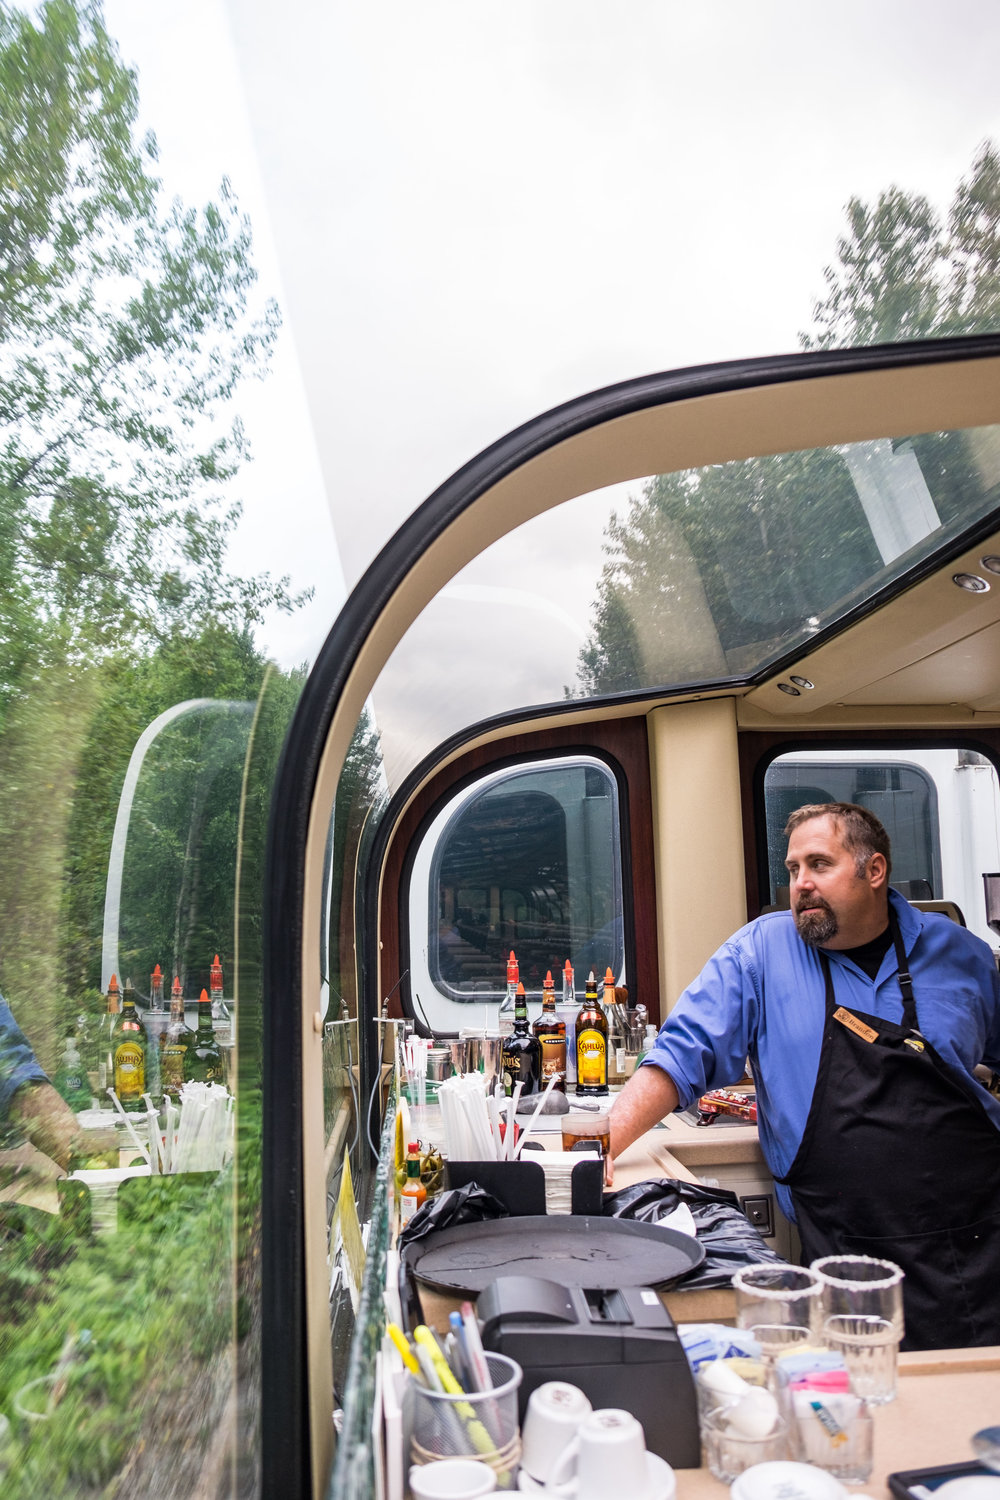  To the delight of passengers on the Wilderness Express, there is cocktail service (and an awesome staff serving it up)!&nbsp; 